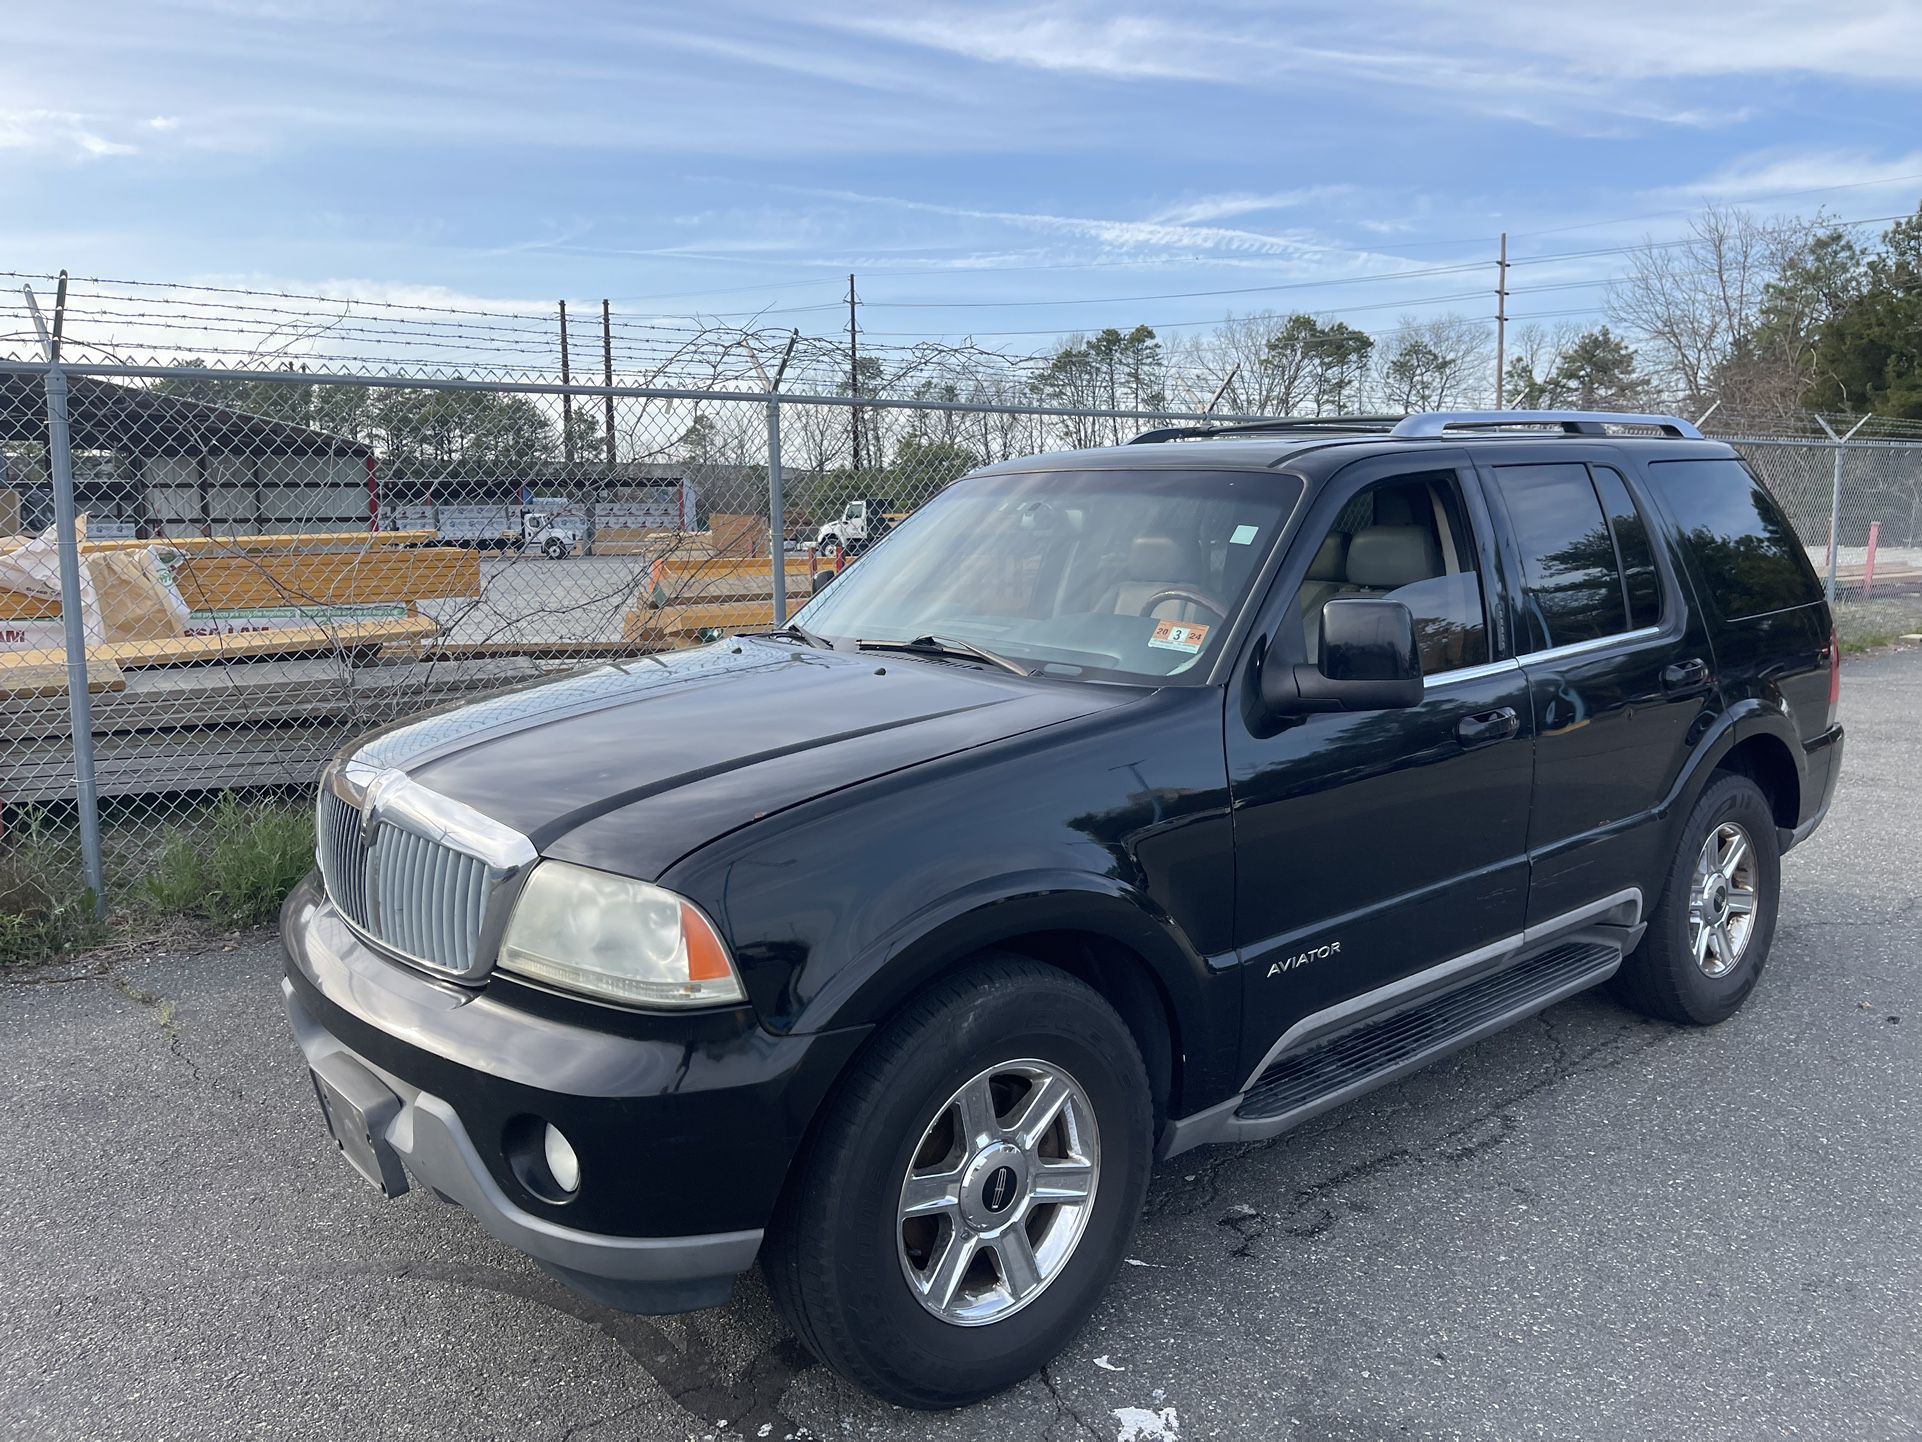 205 Lincoln Aviator V8 Auto Air Fully Loaded 7 Pass 